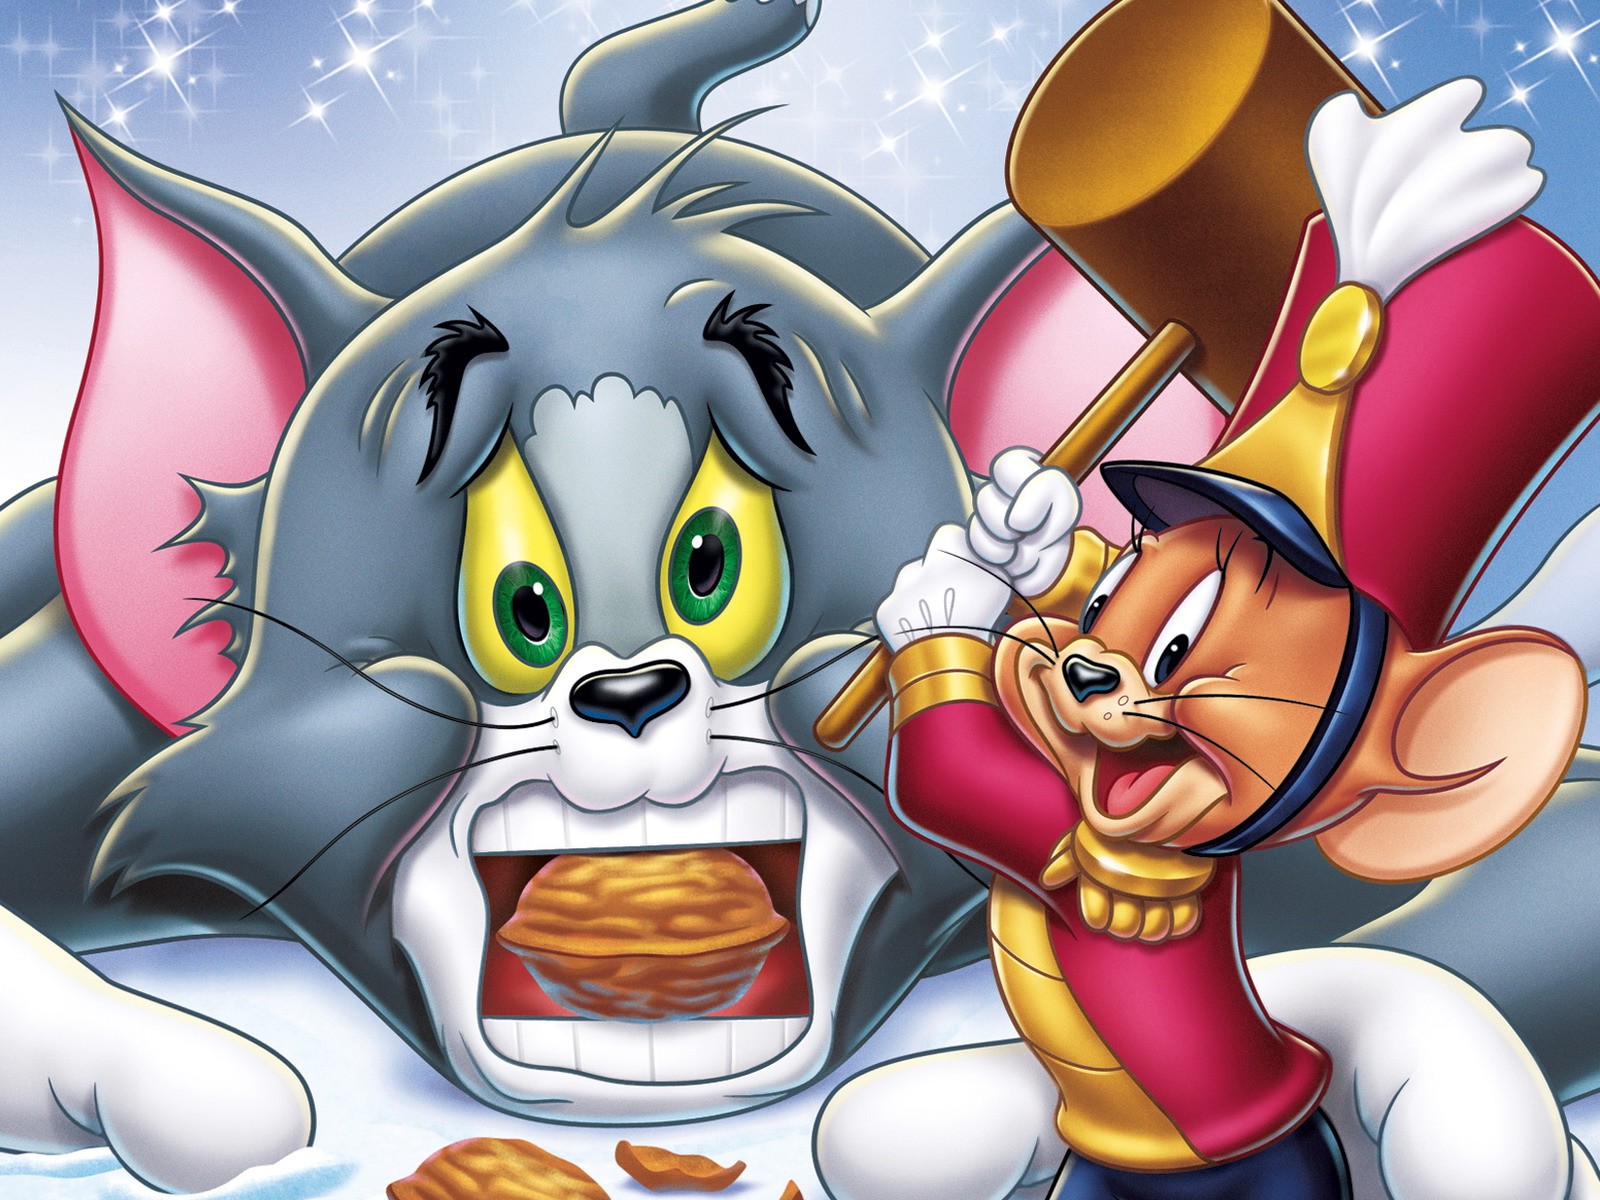 Tom and Jerry wallpaper hd free download